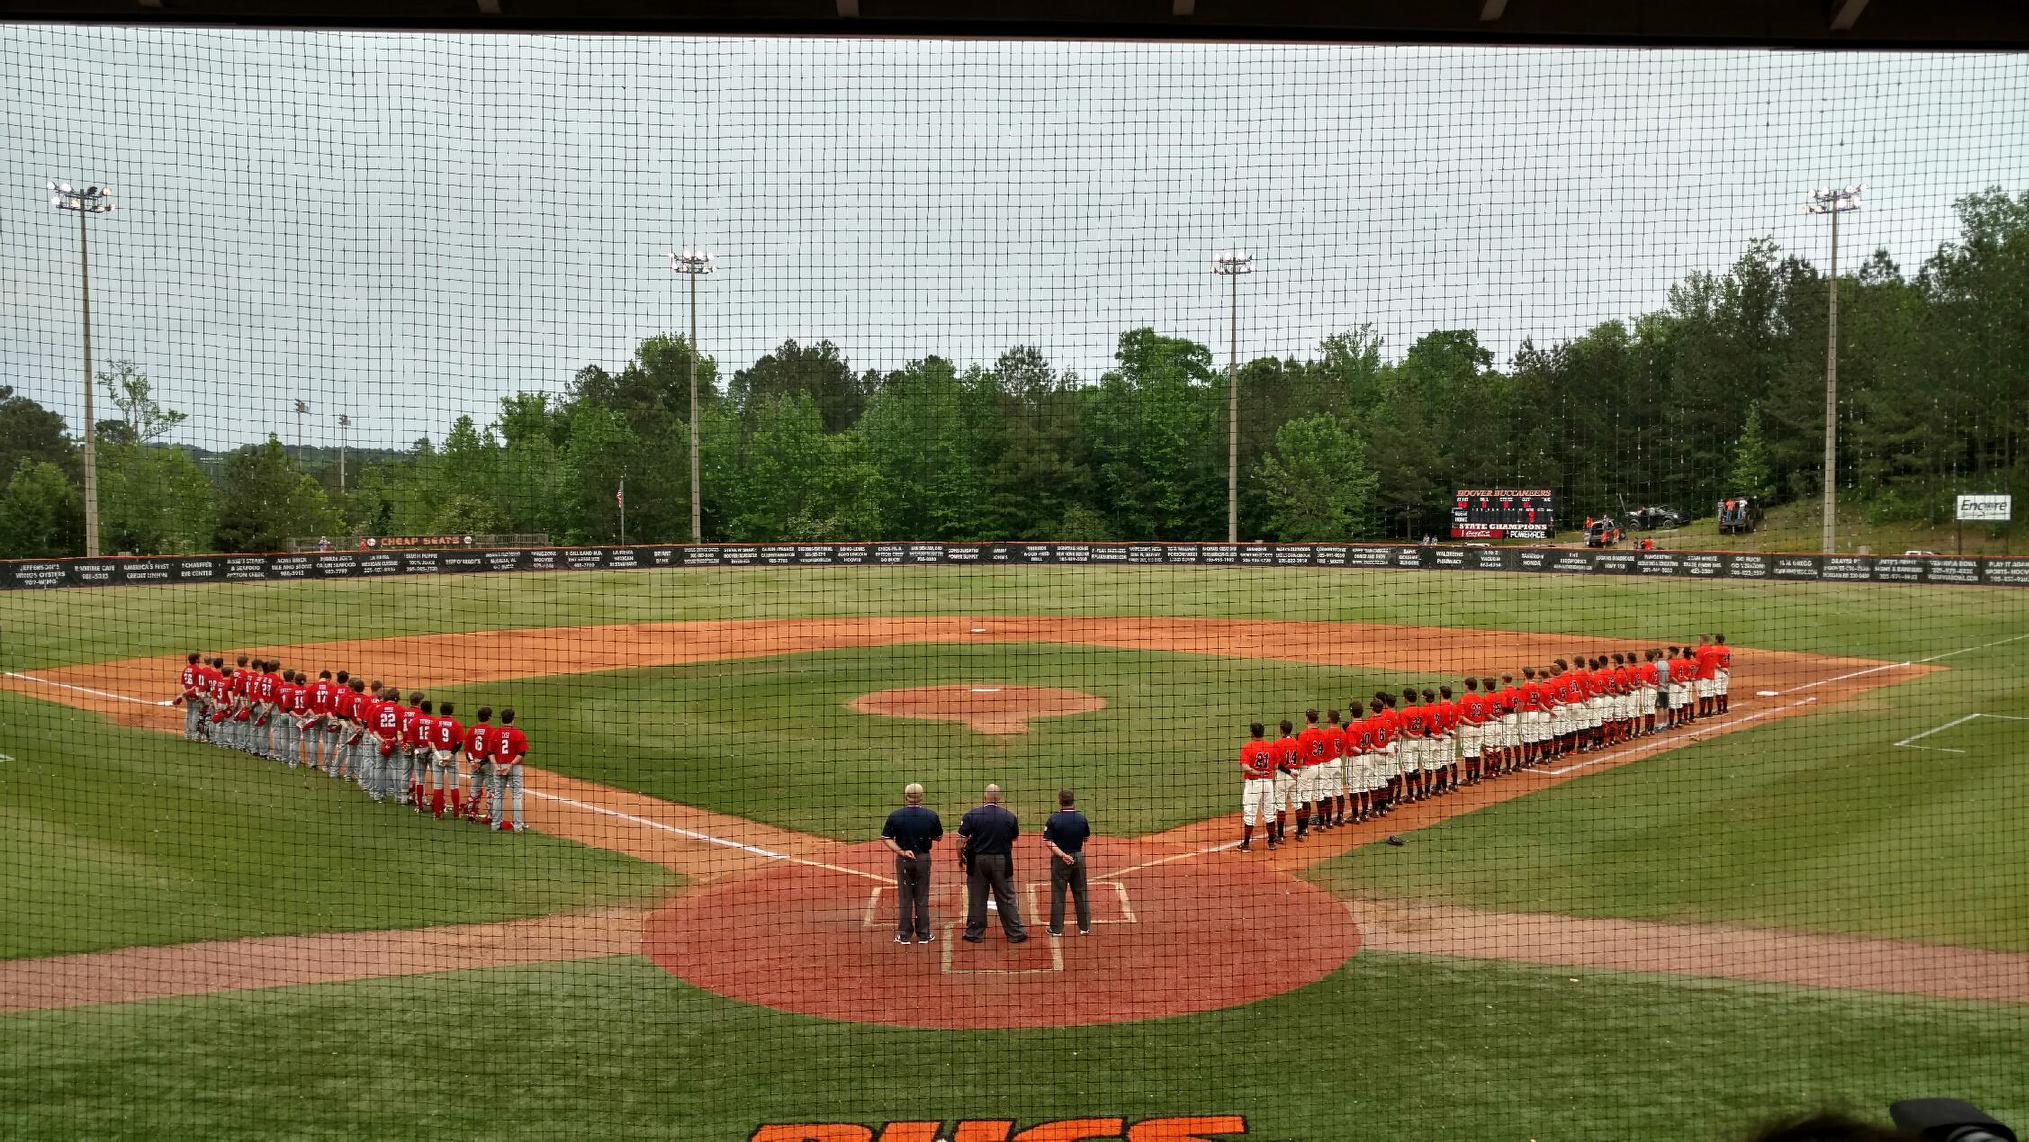 Hewitt-Trussville vs Hoover game suspended with Huskies leading 18-2